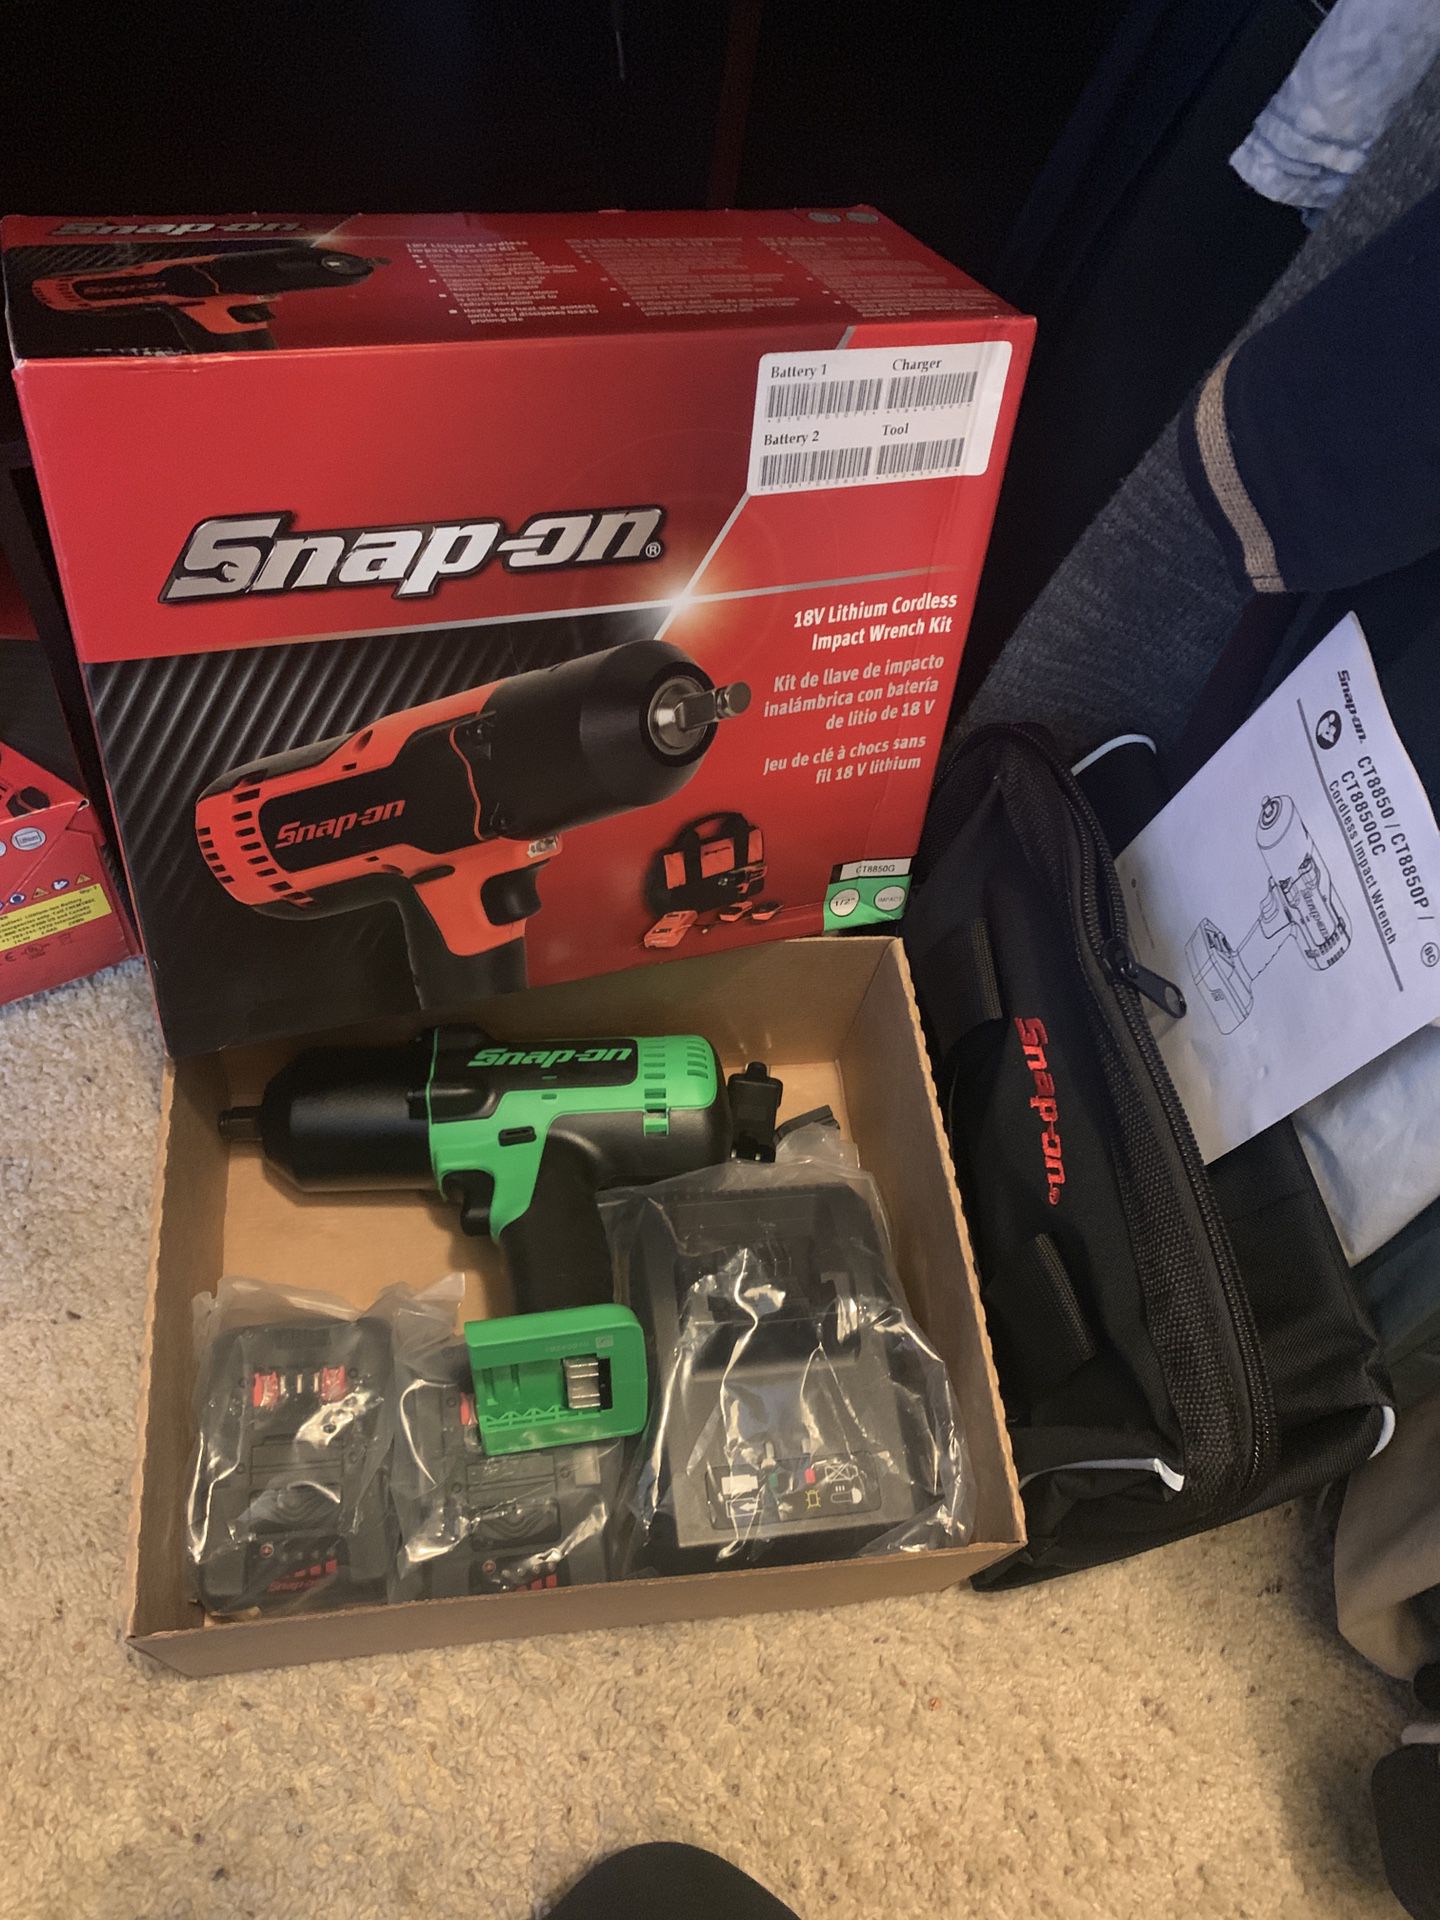 Snap on tools brand new